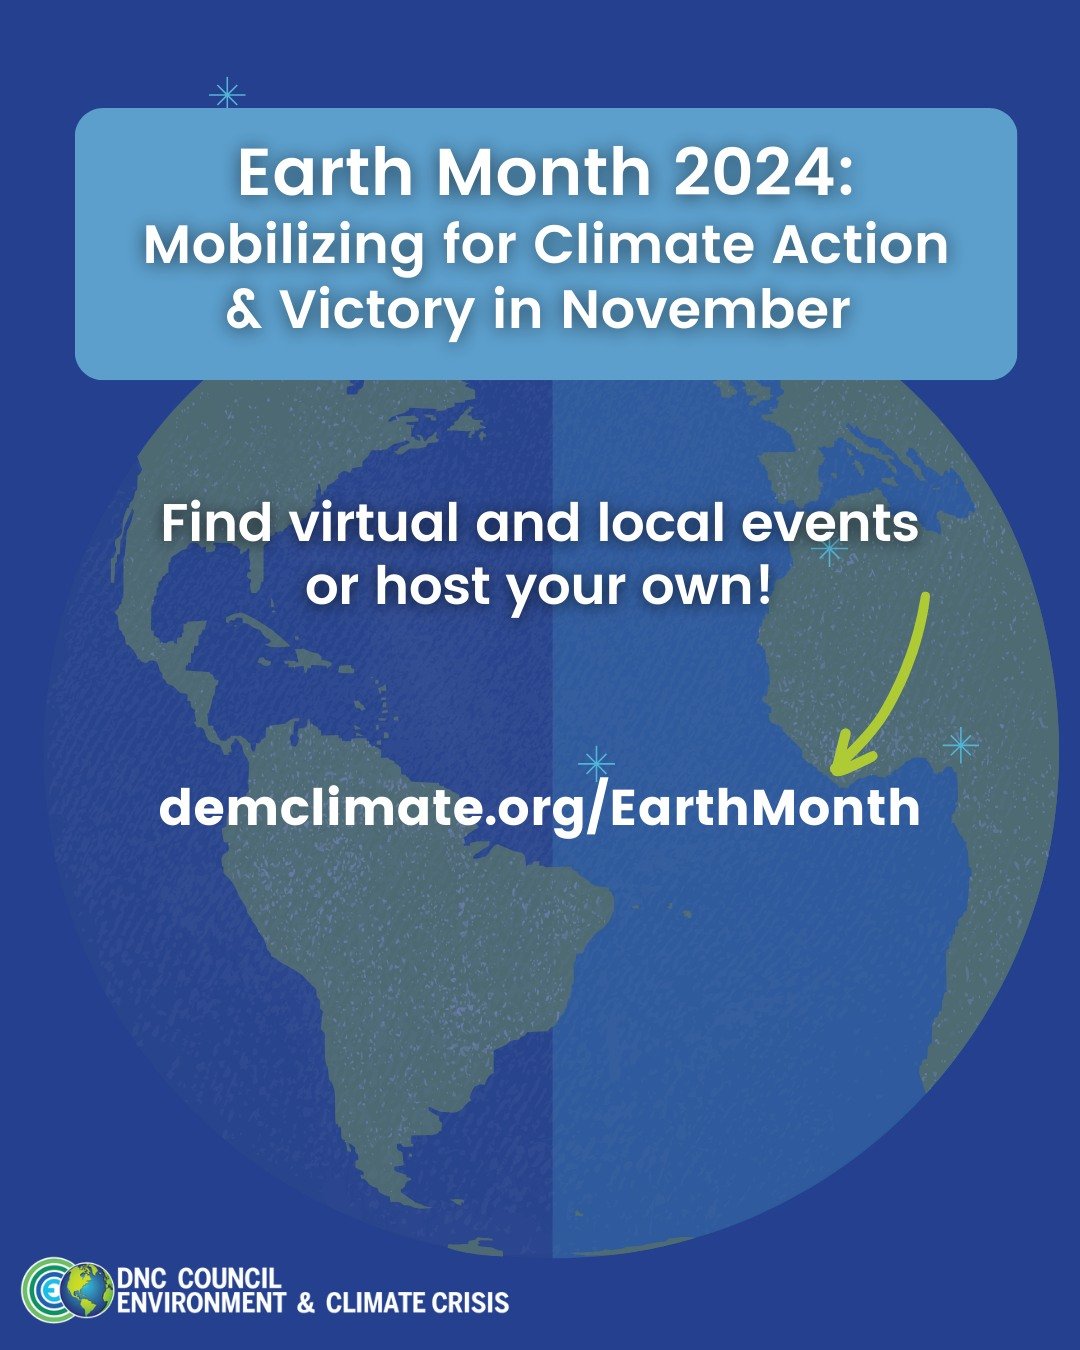 Earth Month is more important than ever this year. Our planet and future are at stake. Democrats must come together to mobilize around climate action and set the stage for 2024 election wins! Climate is on the ballot.

Find virtual and local events o